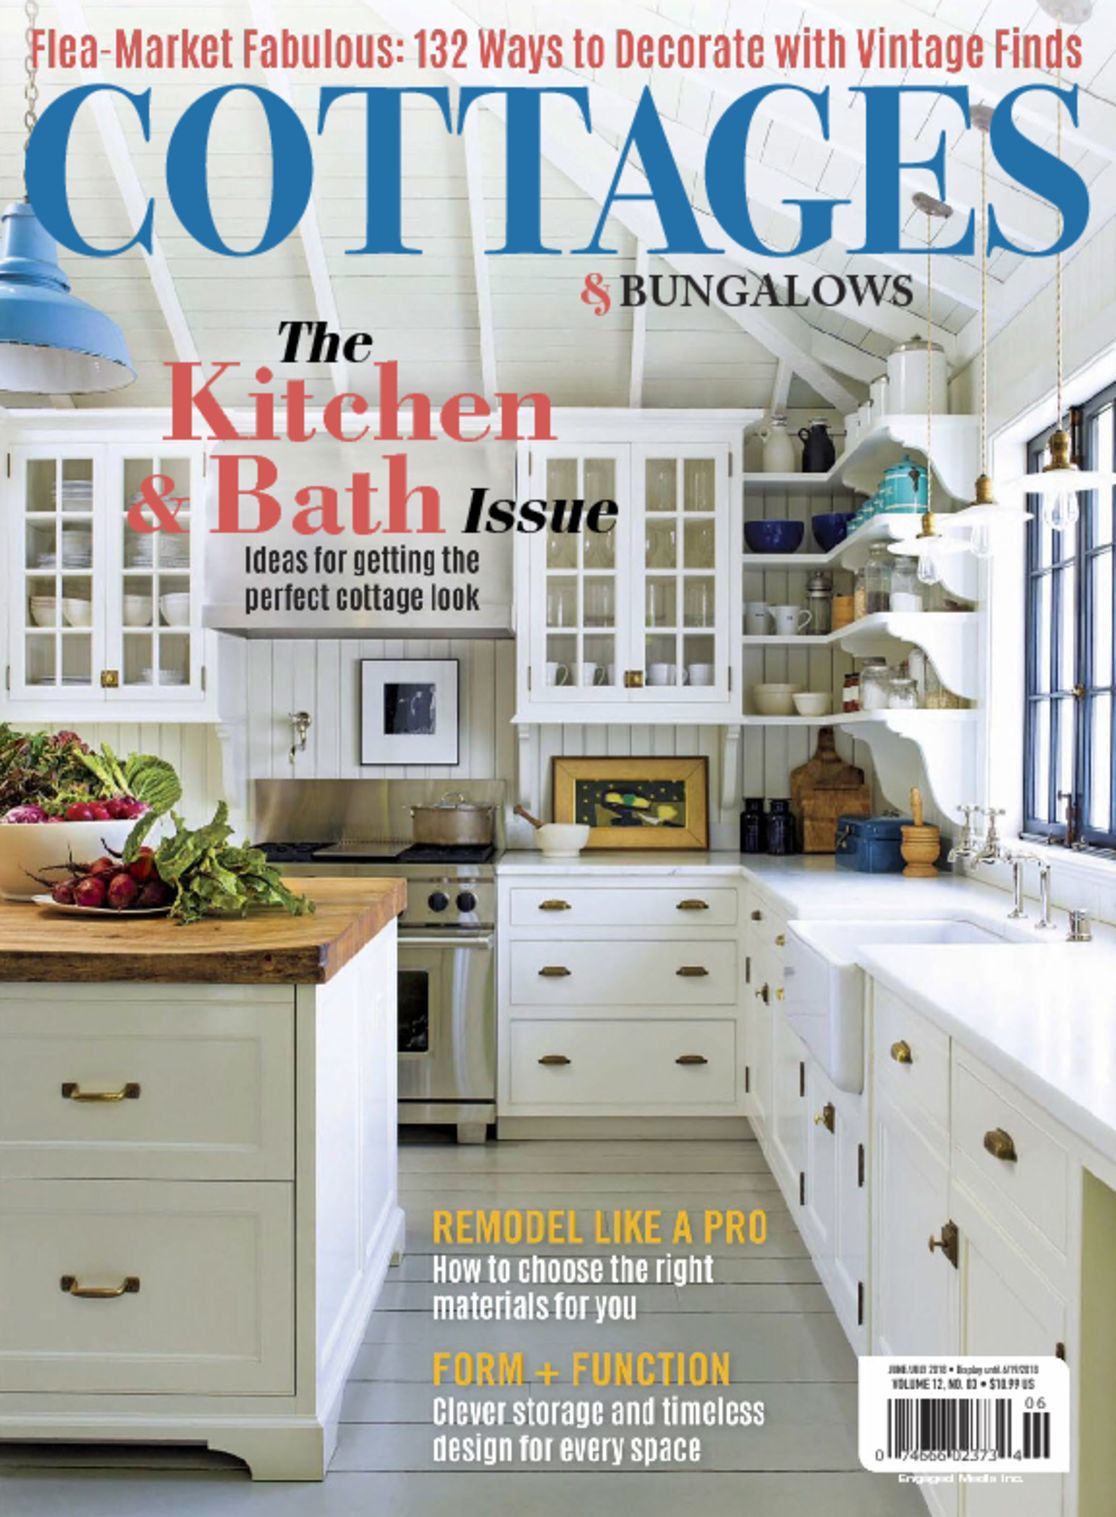  Cottages and Bungalows Magazine  Digital DiscountMags com